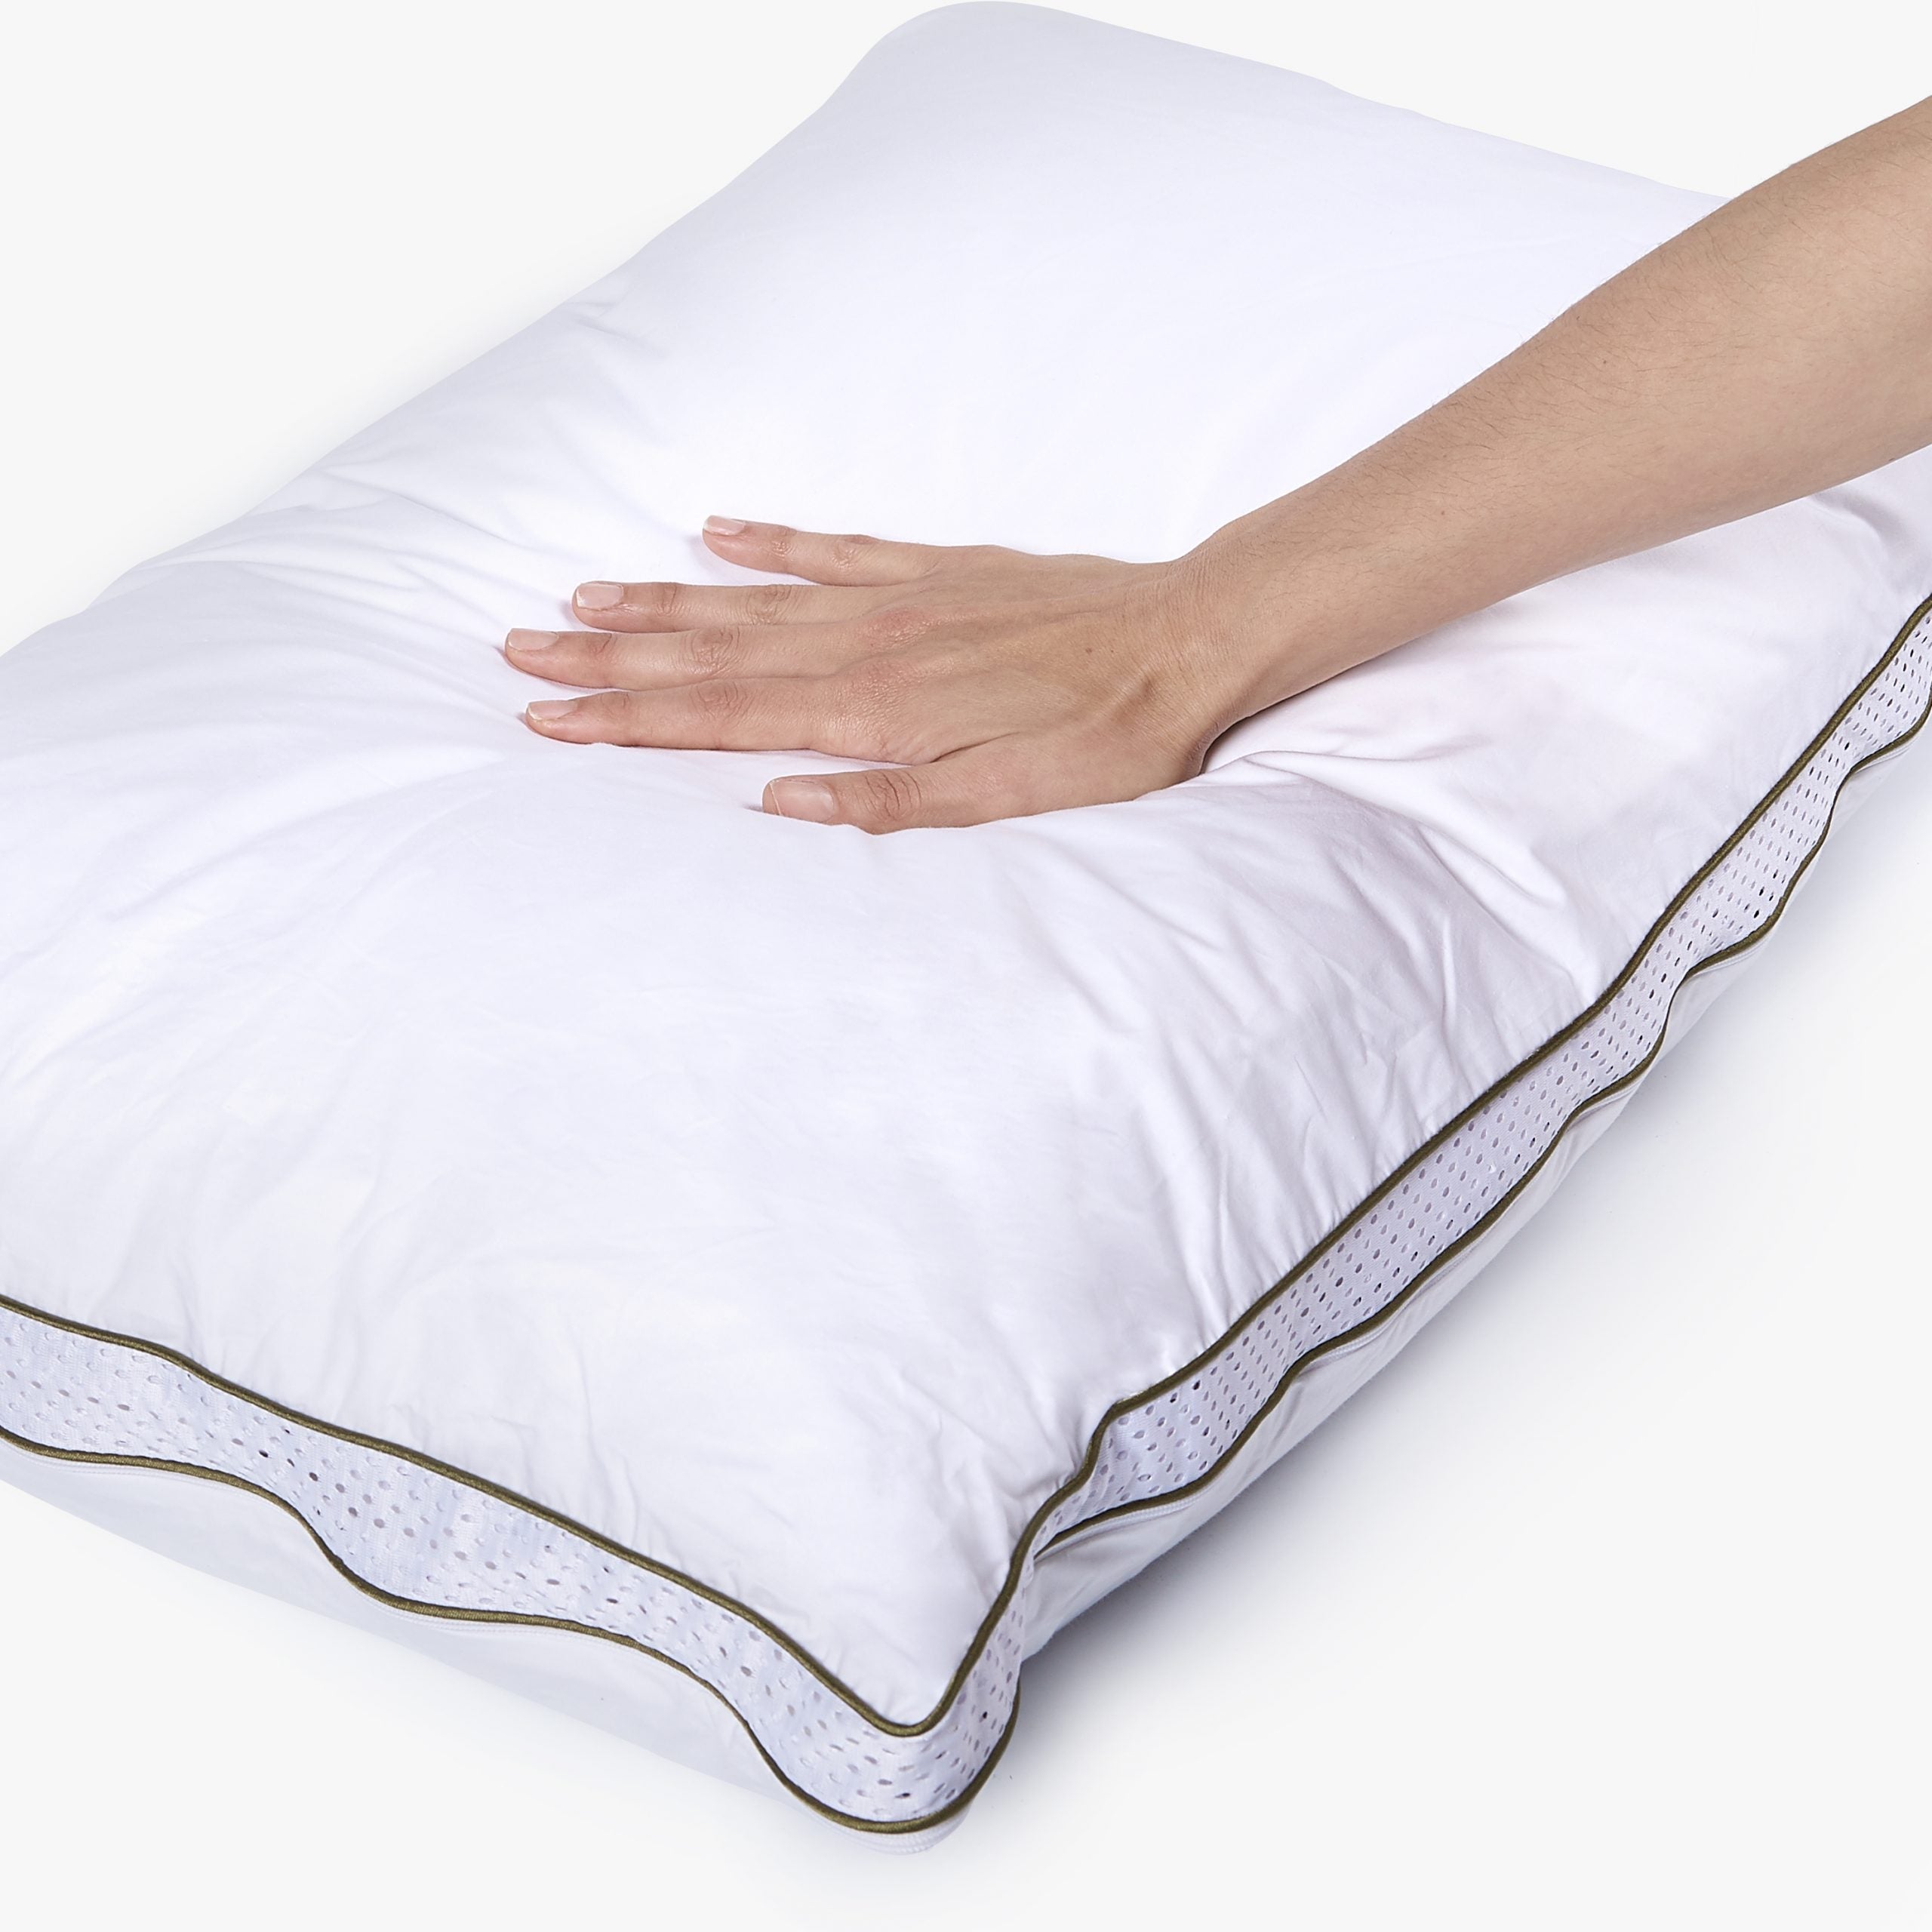 Adjustable-Pillow_1-scaled.jpg